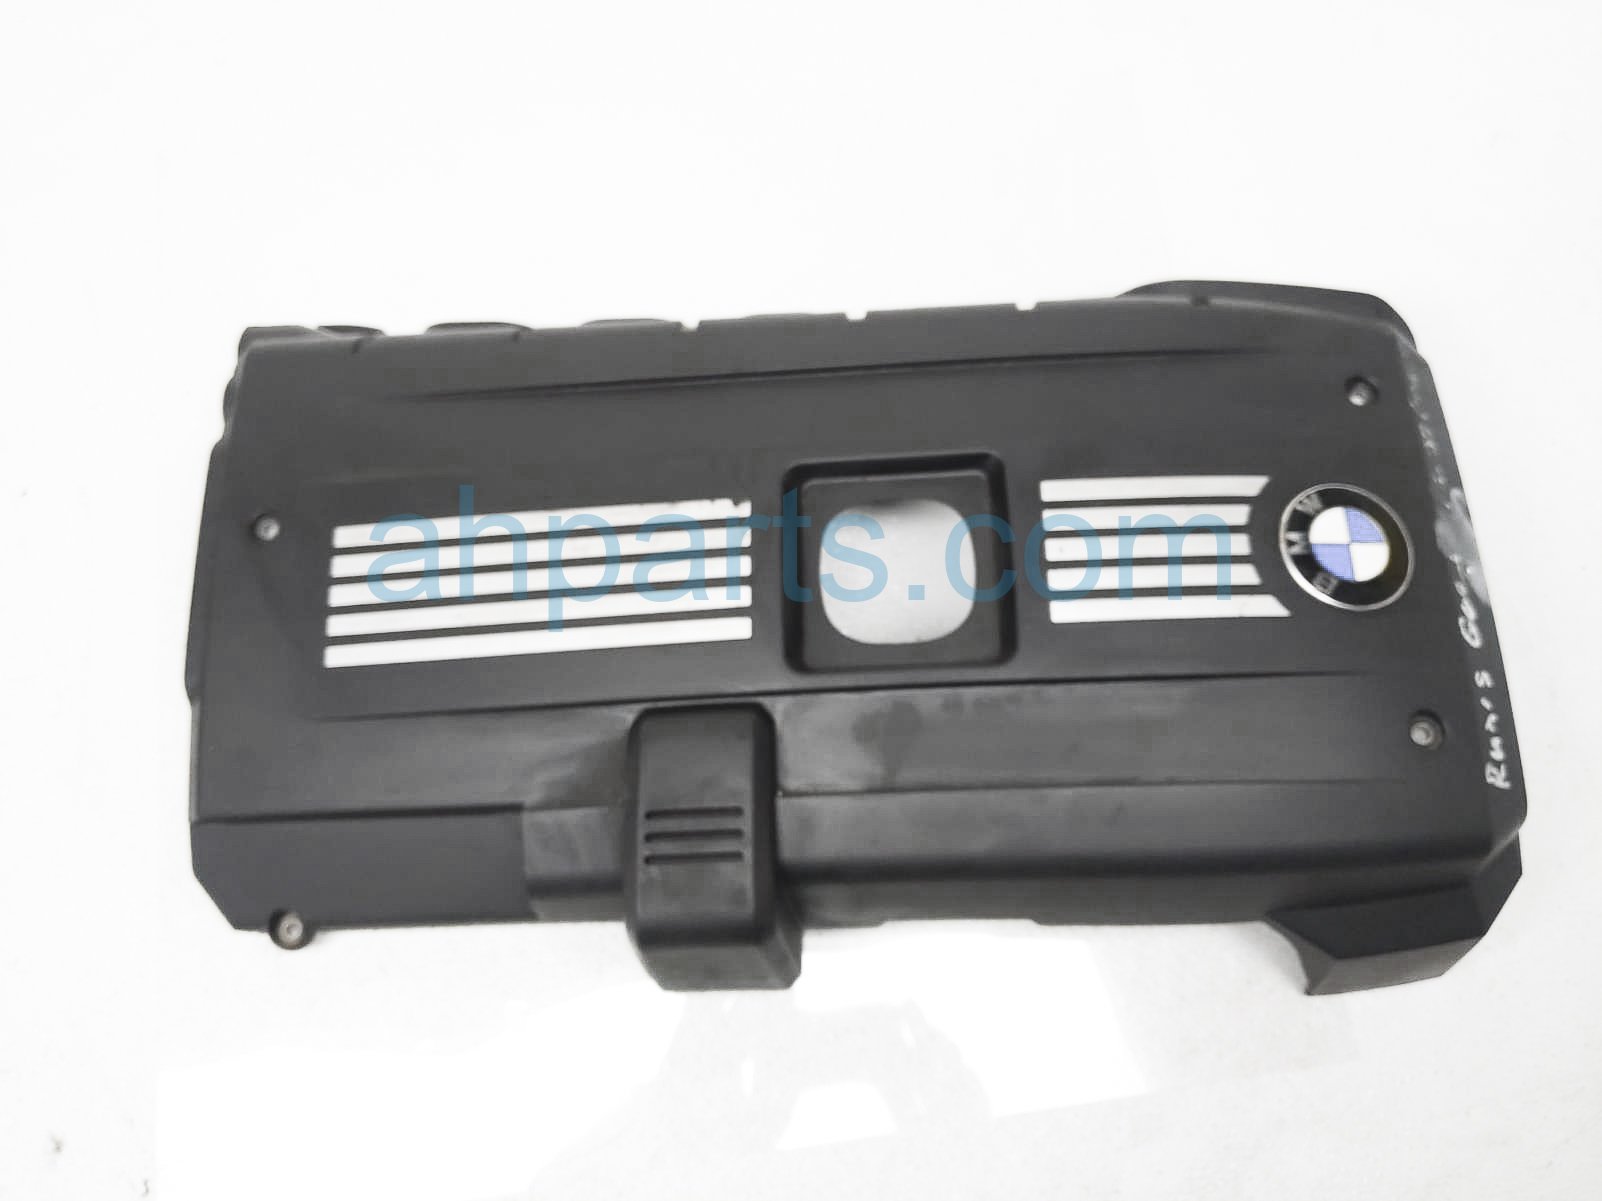 $40 BMW ENGINE APPEARANCE COVER